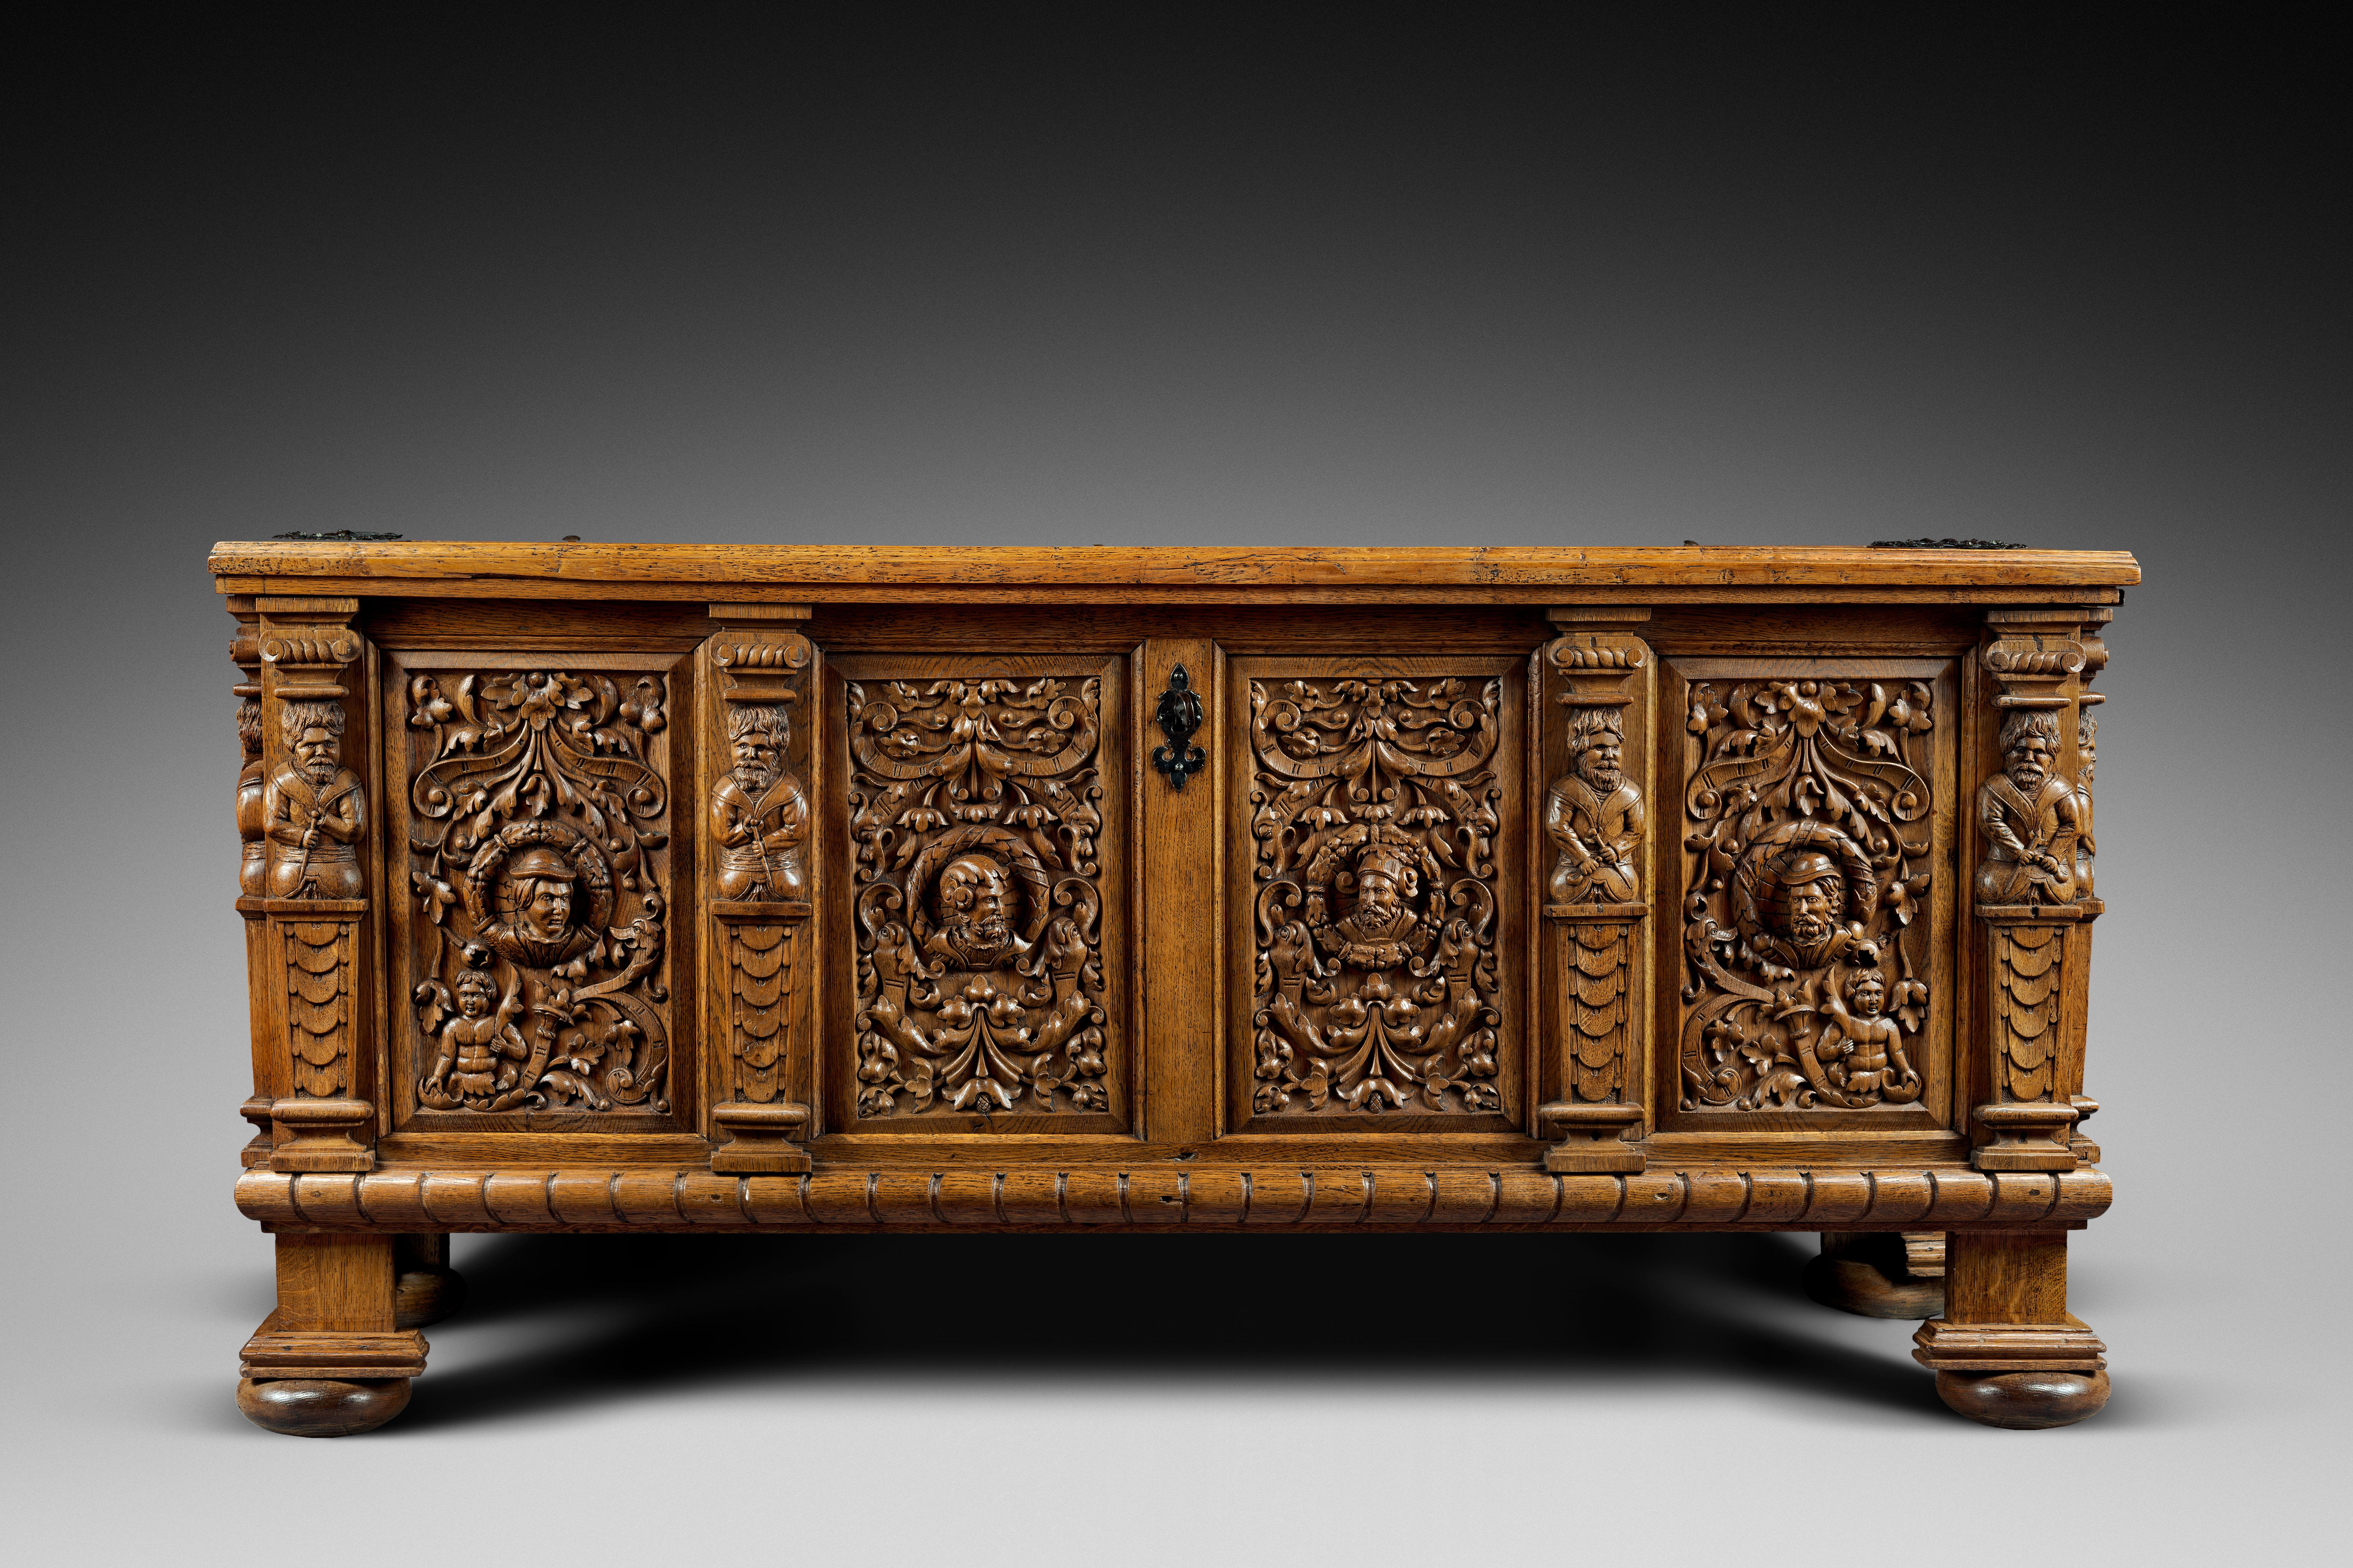 Oakwood
Original lock and key
 
This beautiful and robust chest stands on square feet ending in flattened buns. The base presents plain mouldings. The facade is divided in four panels and four sheathed male terms. Each panel figures a medallion